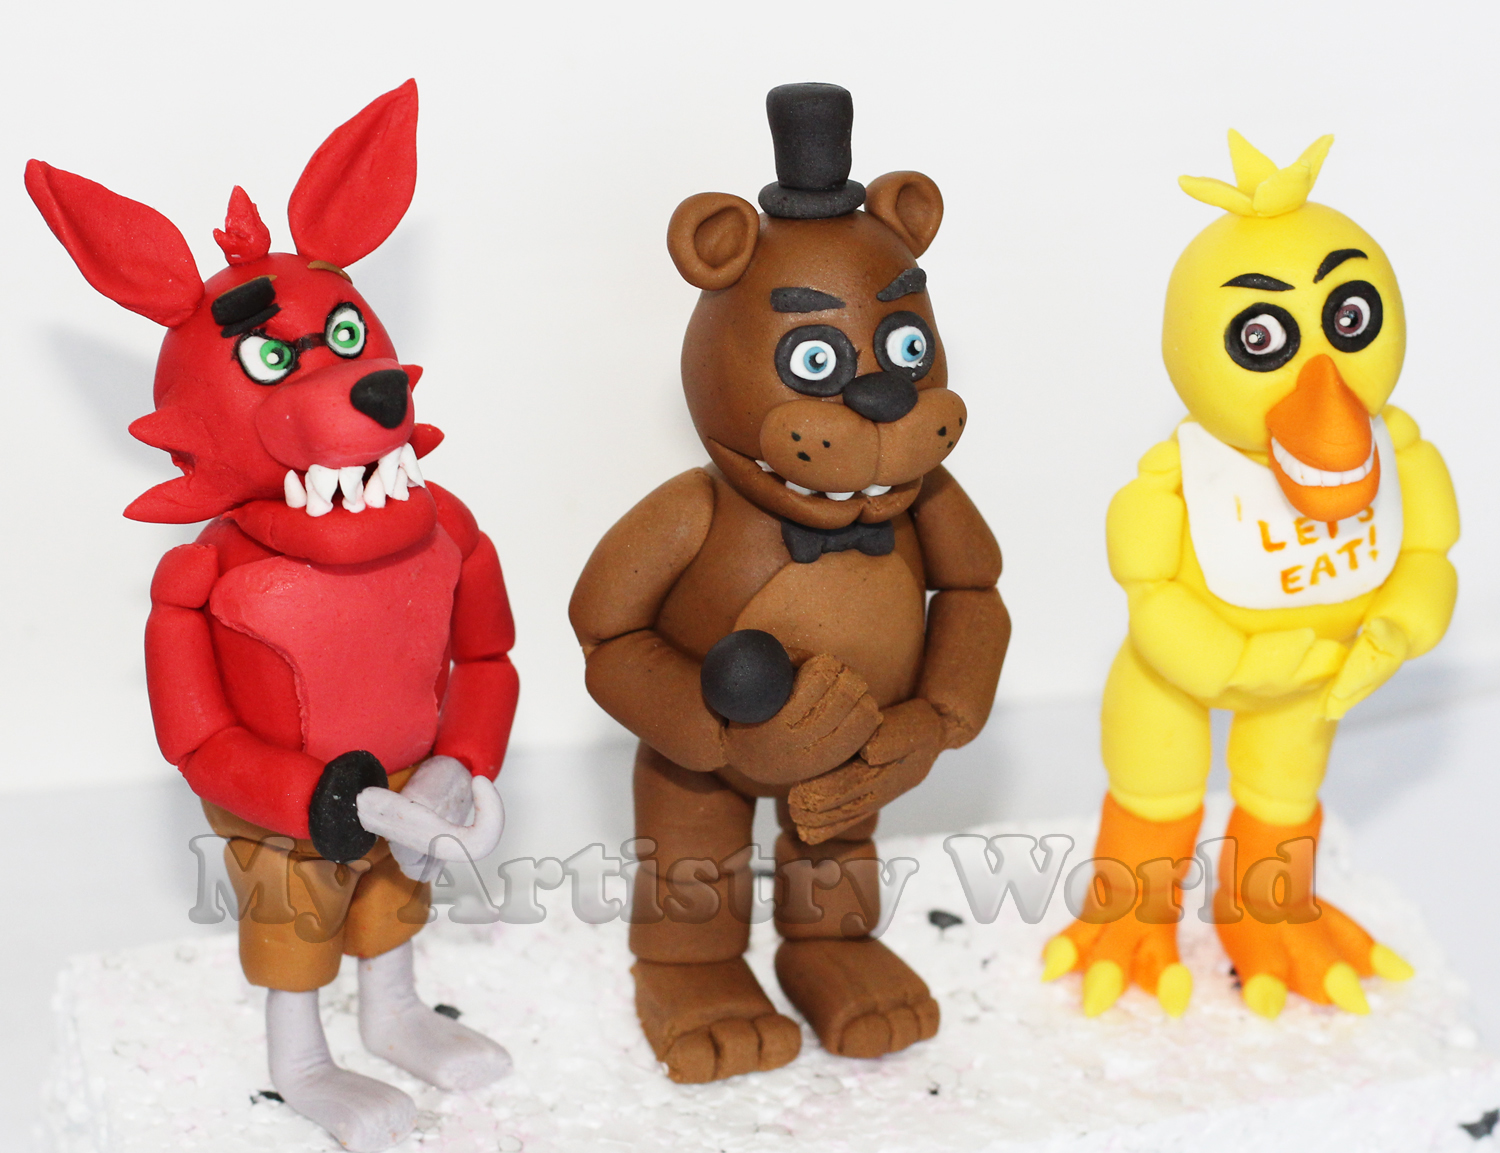 Five Nights at Freddy's (a set of three) cake toppers - My Artistry World